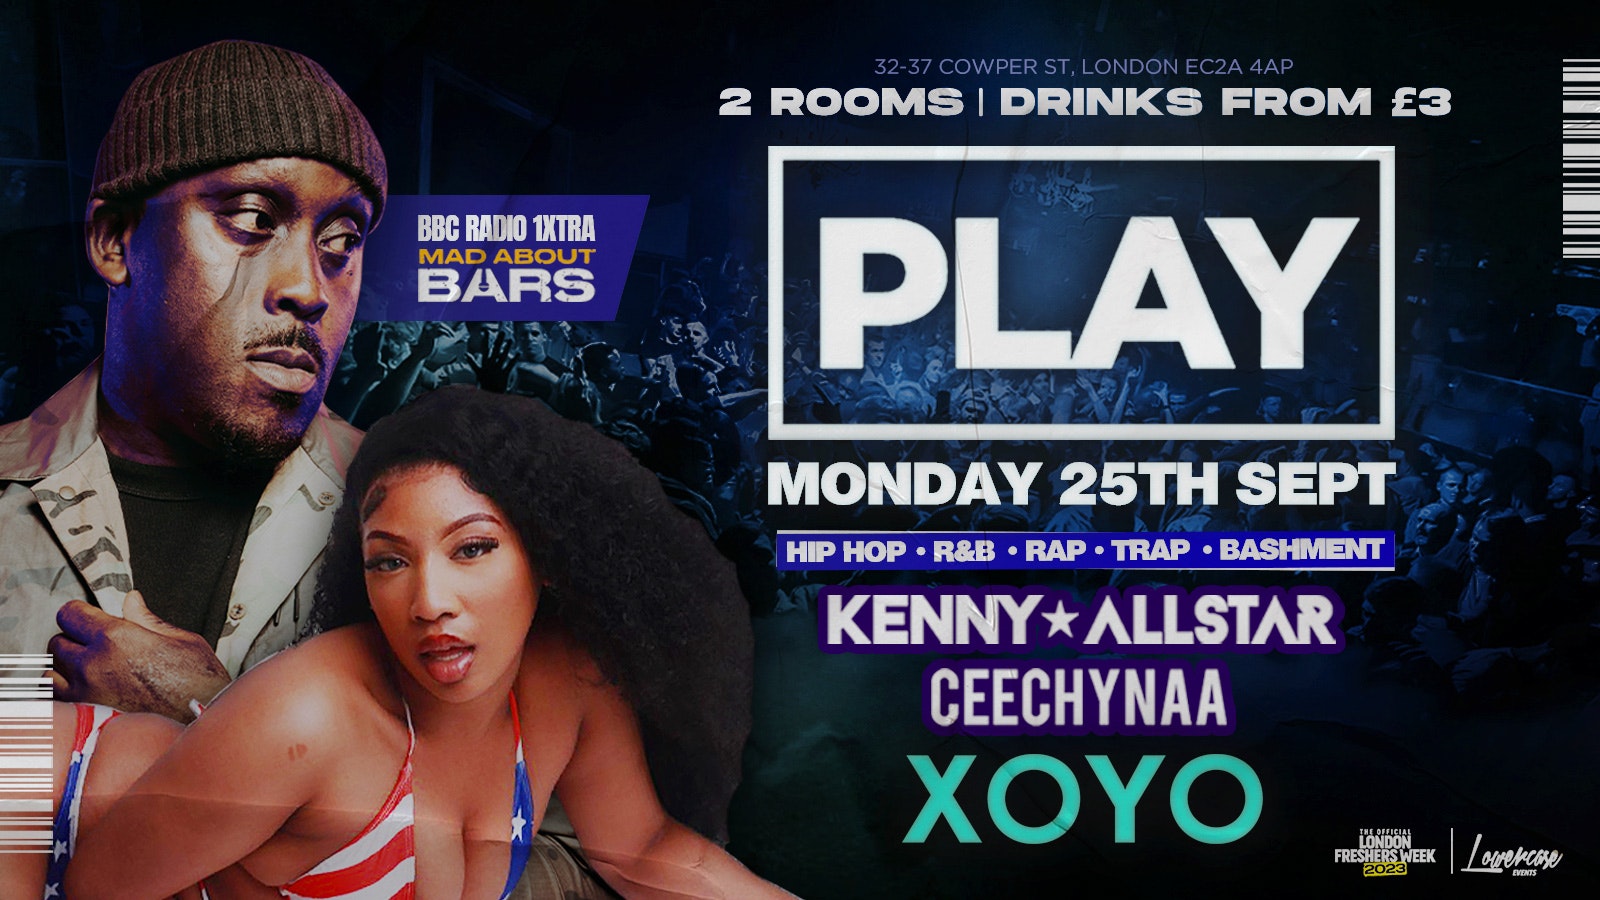 ⚠️ FRESHERS LAUNCH PART 2 ⚠️ At XOYO FT Kenny Allstar + Ceechyna! – The Biggest Weekly Monday Student Night